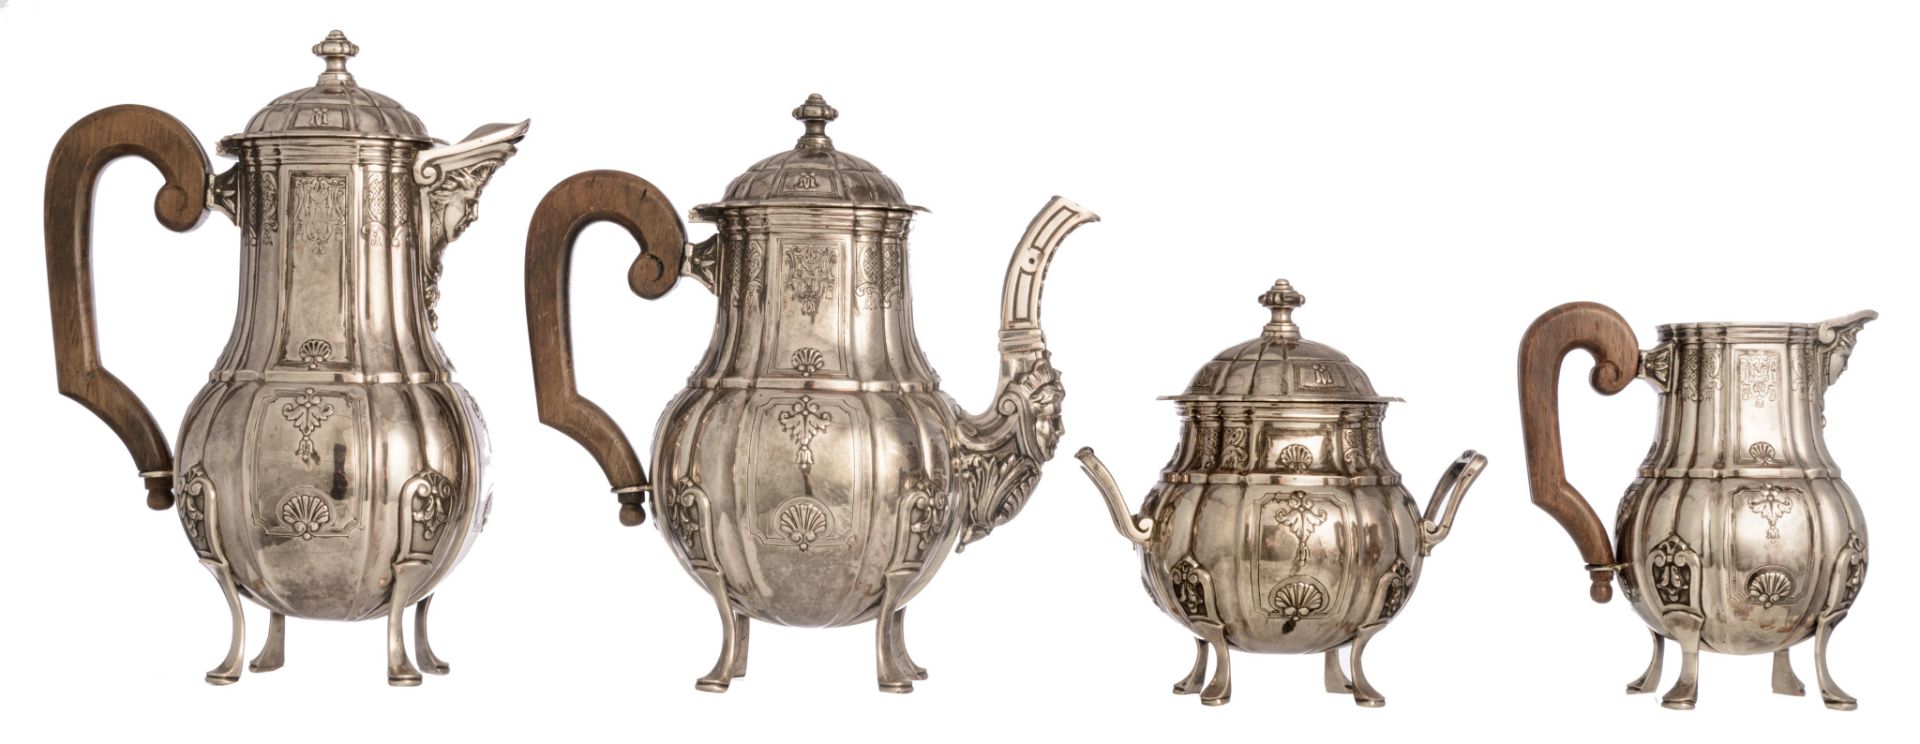 A four-part Belgian silver coffee and tea set, H 15 - 29 cm / total weight c. 4.290 g - Image 2 of 13